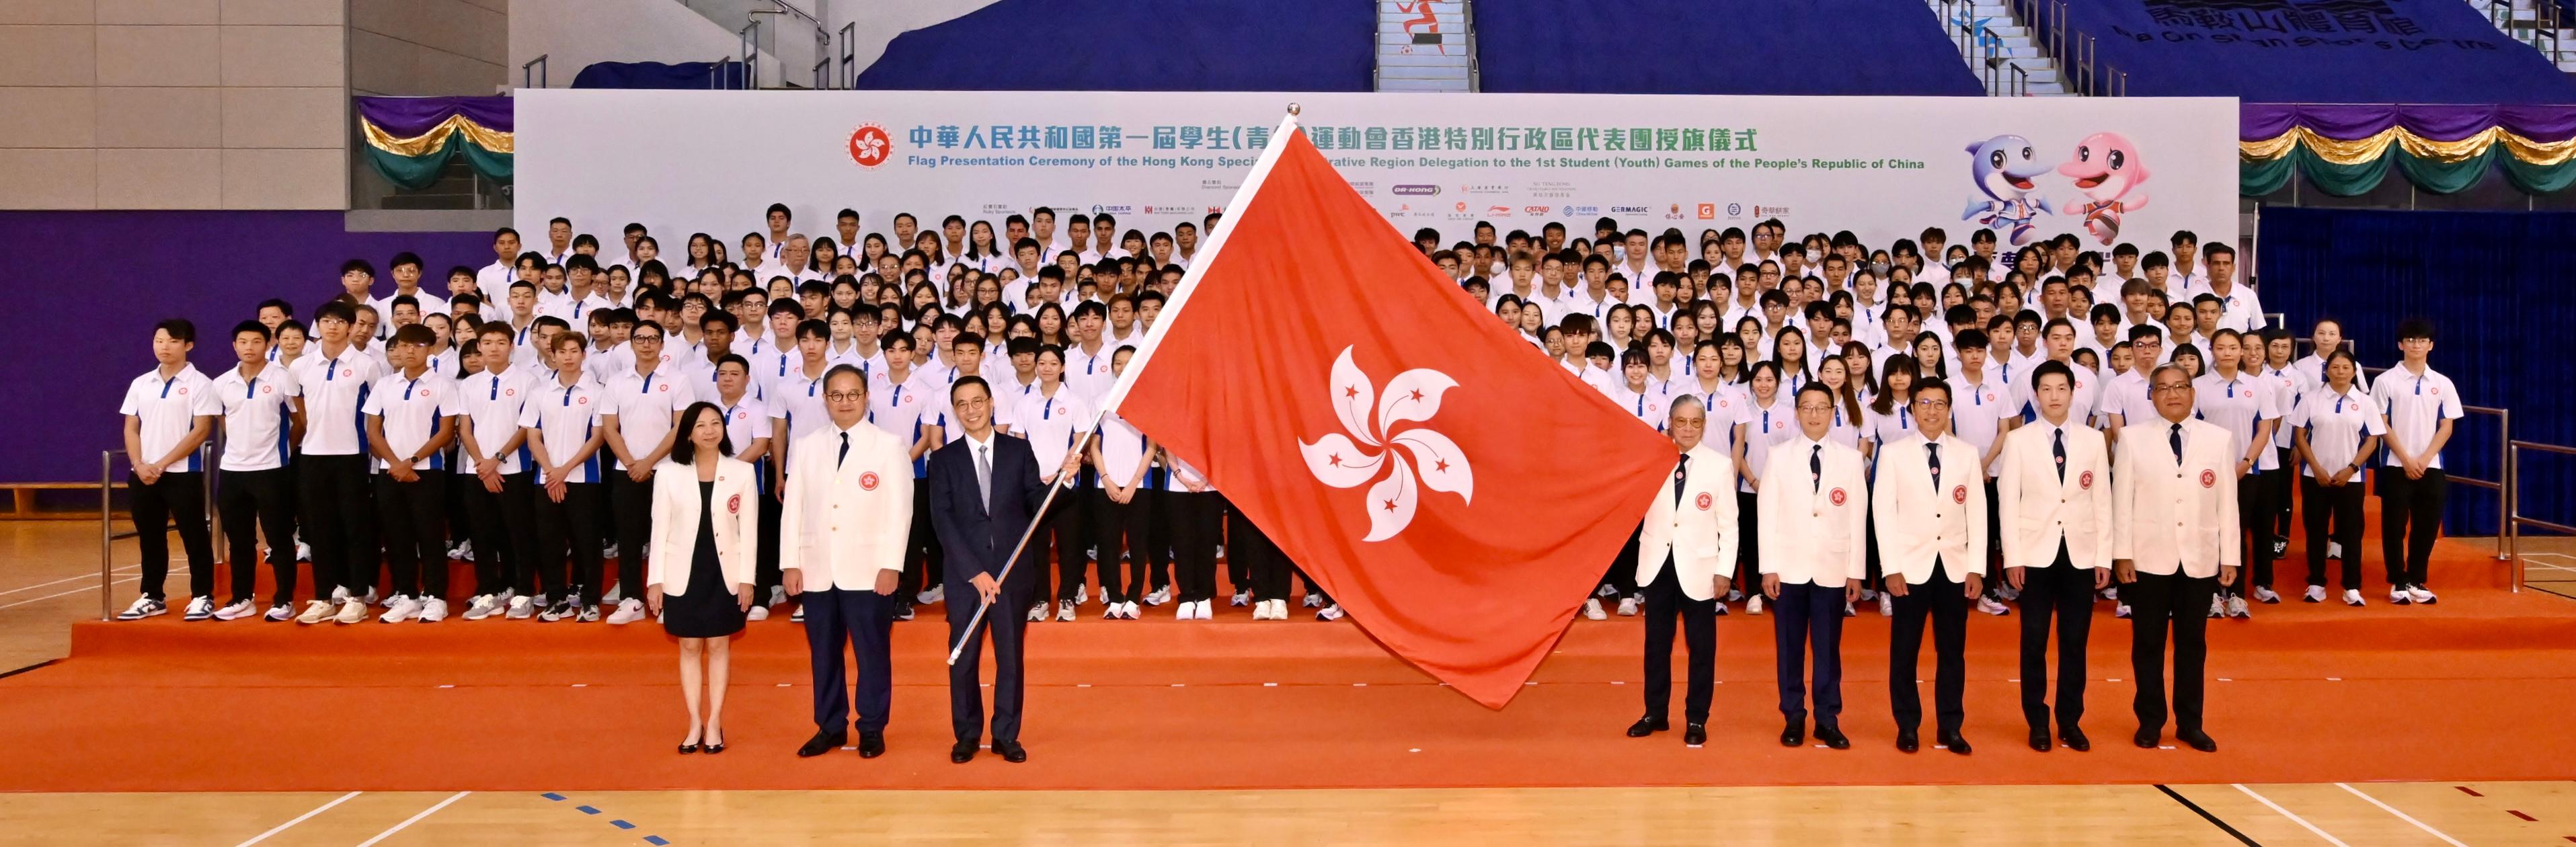 The Secretary for Culture, Sports and Tourism and the Chef de Mission of the Hong Kong Special Administrative Region (HKSAR) Delegation, Mr Kevin Yeung, officiated at the flag presentation ceremony for the Delegation to the 1st National Student (Youth) Games at Ma On Shan Sports Centre, Sha Tin today (October 25). Photo shows Mr Yeung (front row, third left) presenting the HKSAR regional flag to the President of the Sports Federation & Olympic Committee of Hong Kong, China and the Chairman of the Organising Committee of the Delegation, Mr Timothy Fok (front row, fifth right).